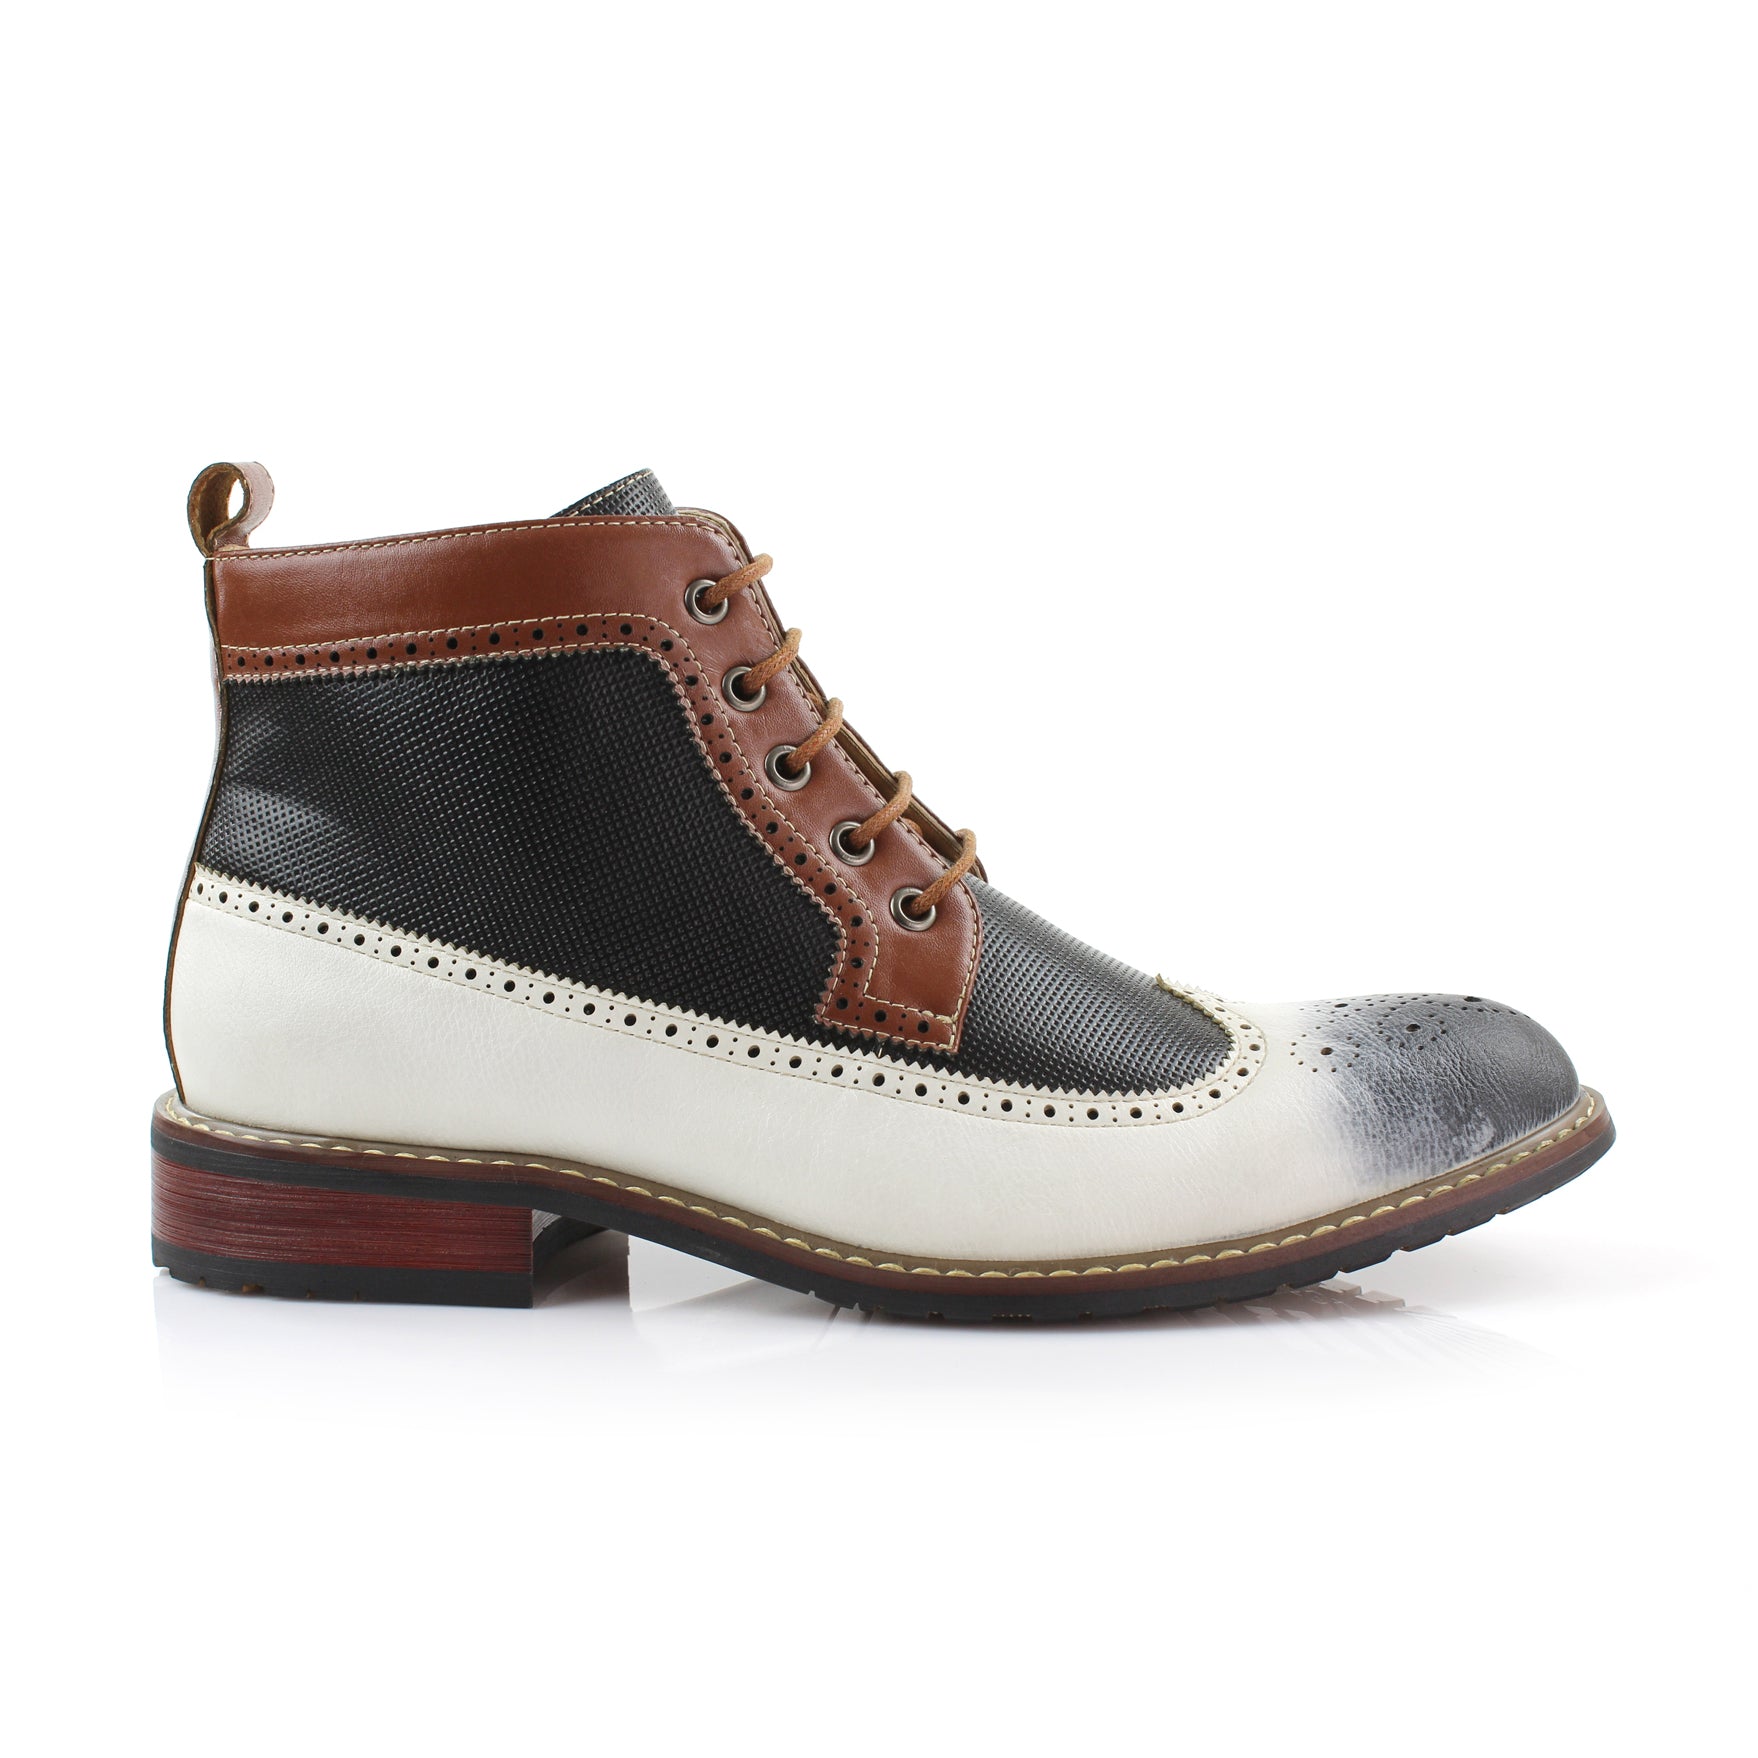 Two-Toned Brogue Wingtip Boots | Michael by Ferro Aldo | Conal Footwear | Outer Side Angle View